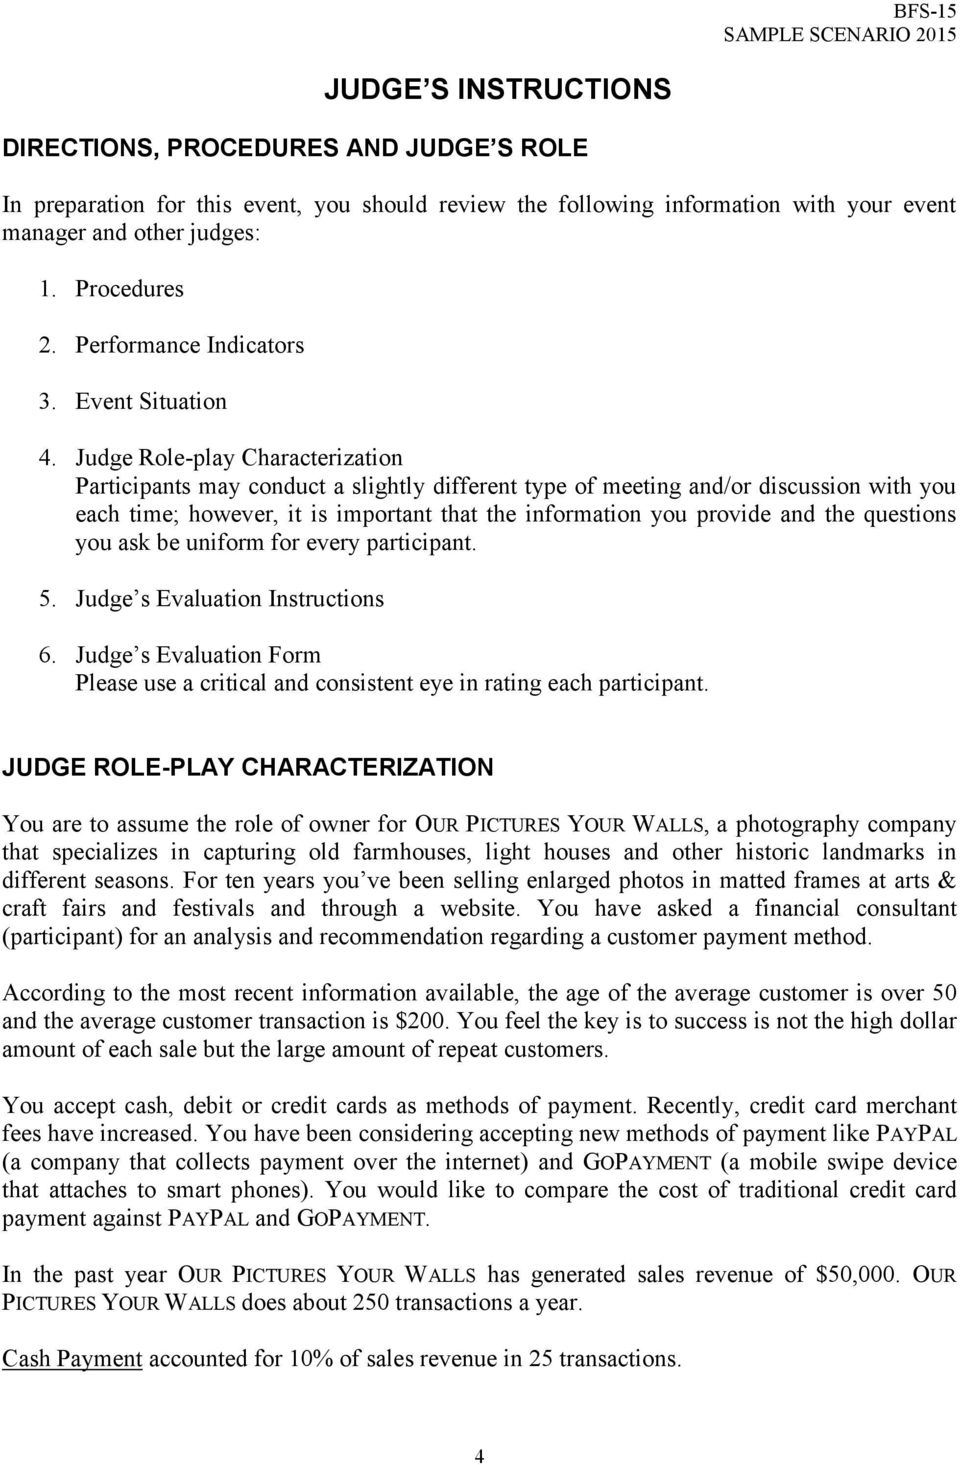 Judge Role-play Characterization Participants may conduct a slightly different type of meeting and/or discussion with you each time; however, it is important that the information you provide and the